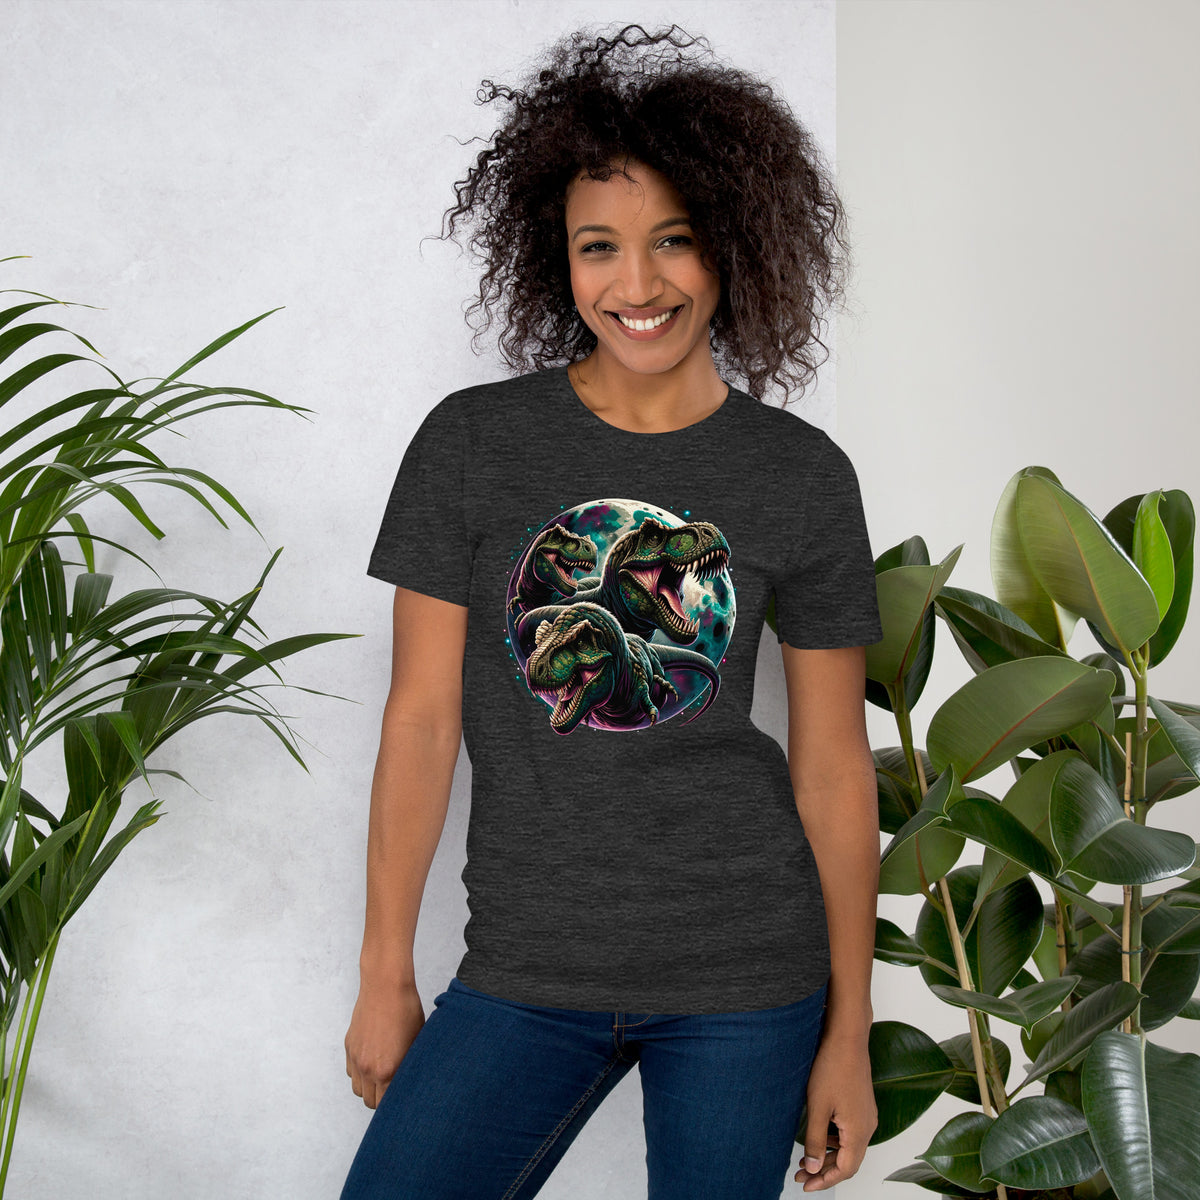 Three Dinosaur Moon Shirt, T Rex Roaring Tee, Dino Lovers, Funny Astronomy Outer Space Galaxy Gift